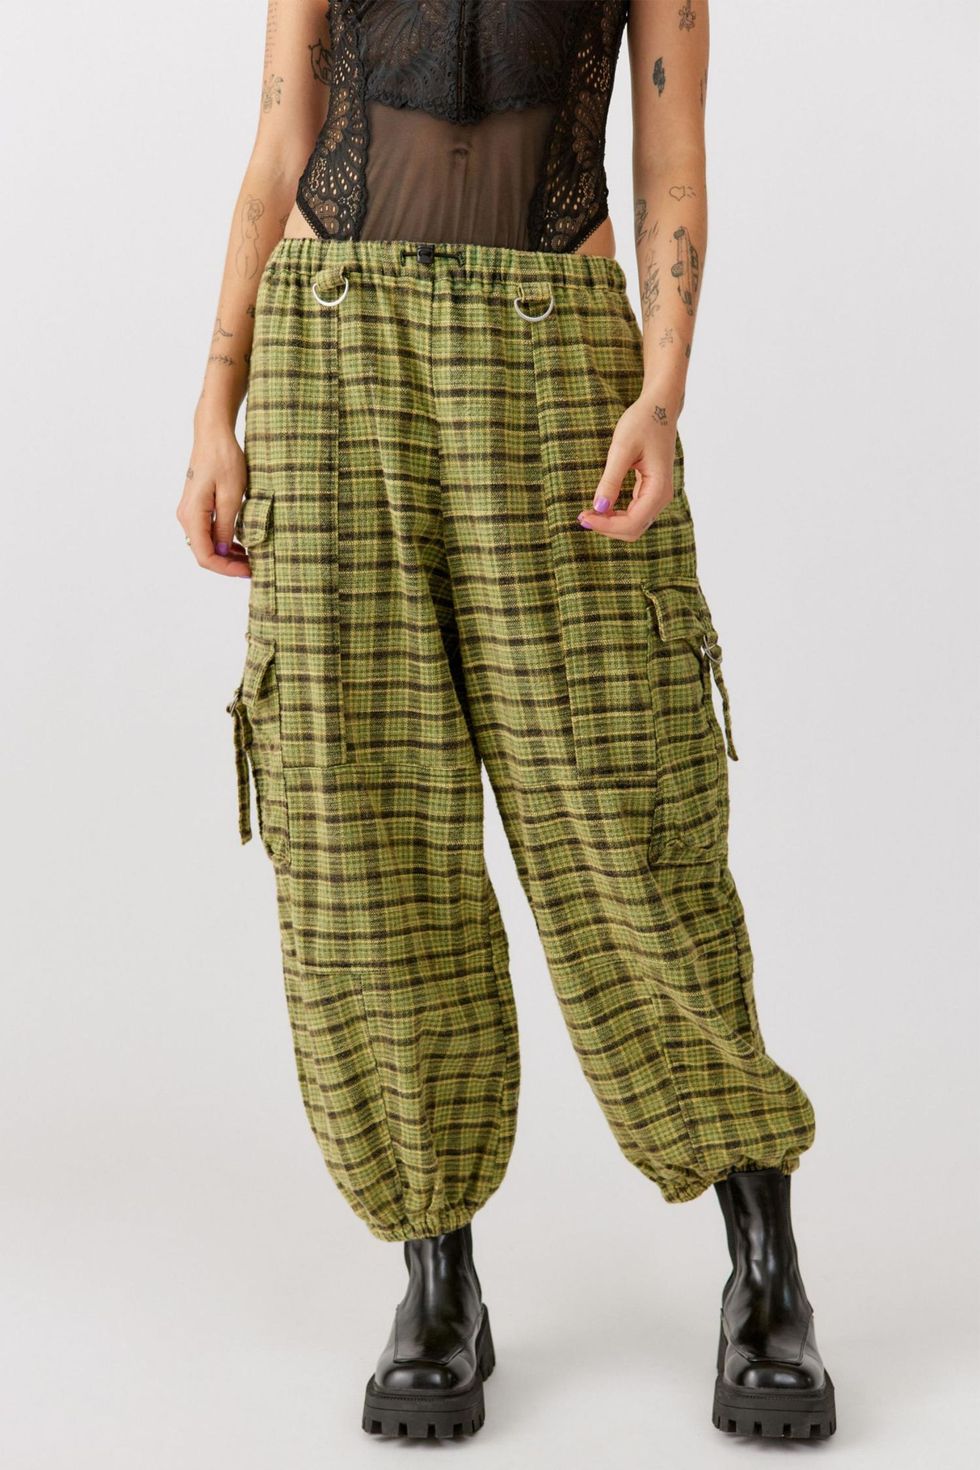 We're Bringing Back Parachute Pants With These 13 Picks